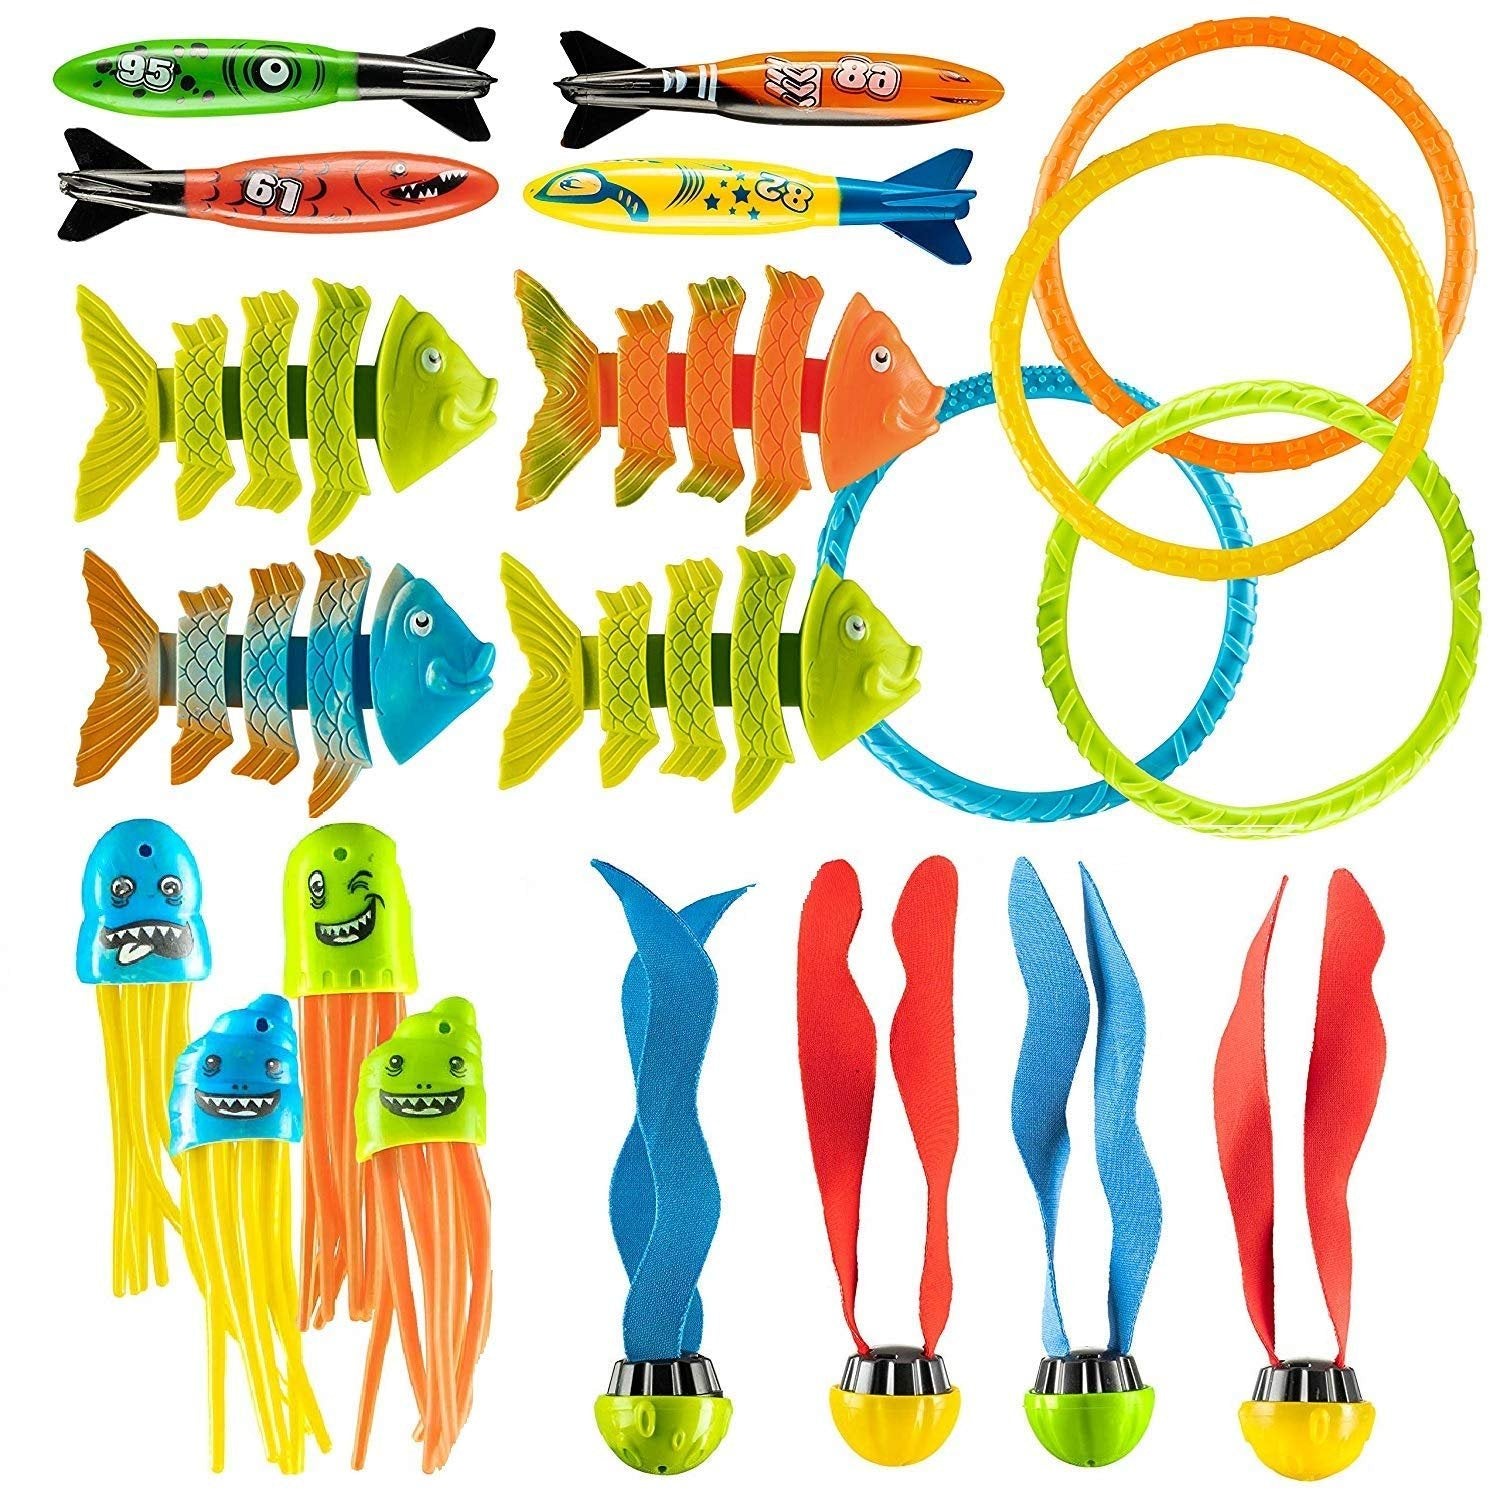 PREXTEX Pool Diving Toys, 24pcs - Kids Swimming Pool Toys, Toddler/Kids Pool Toys, Swim Toys, Pool Dive Toys - Pool Games for Kids - Dive Toys for Pool for Kids, Toddlers, Adults, Family, All Ages